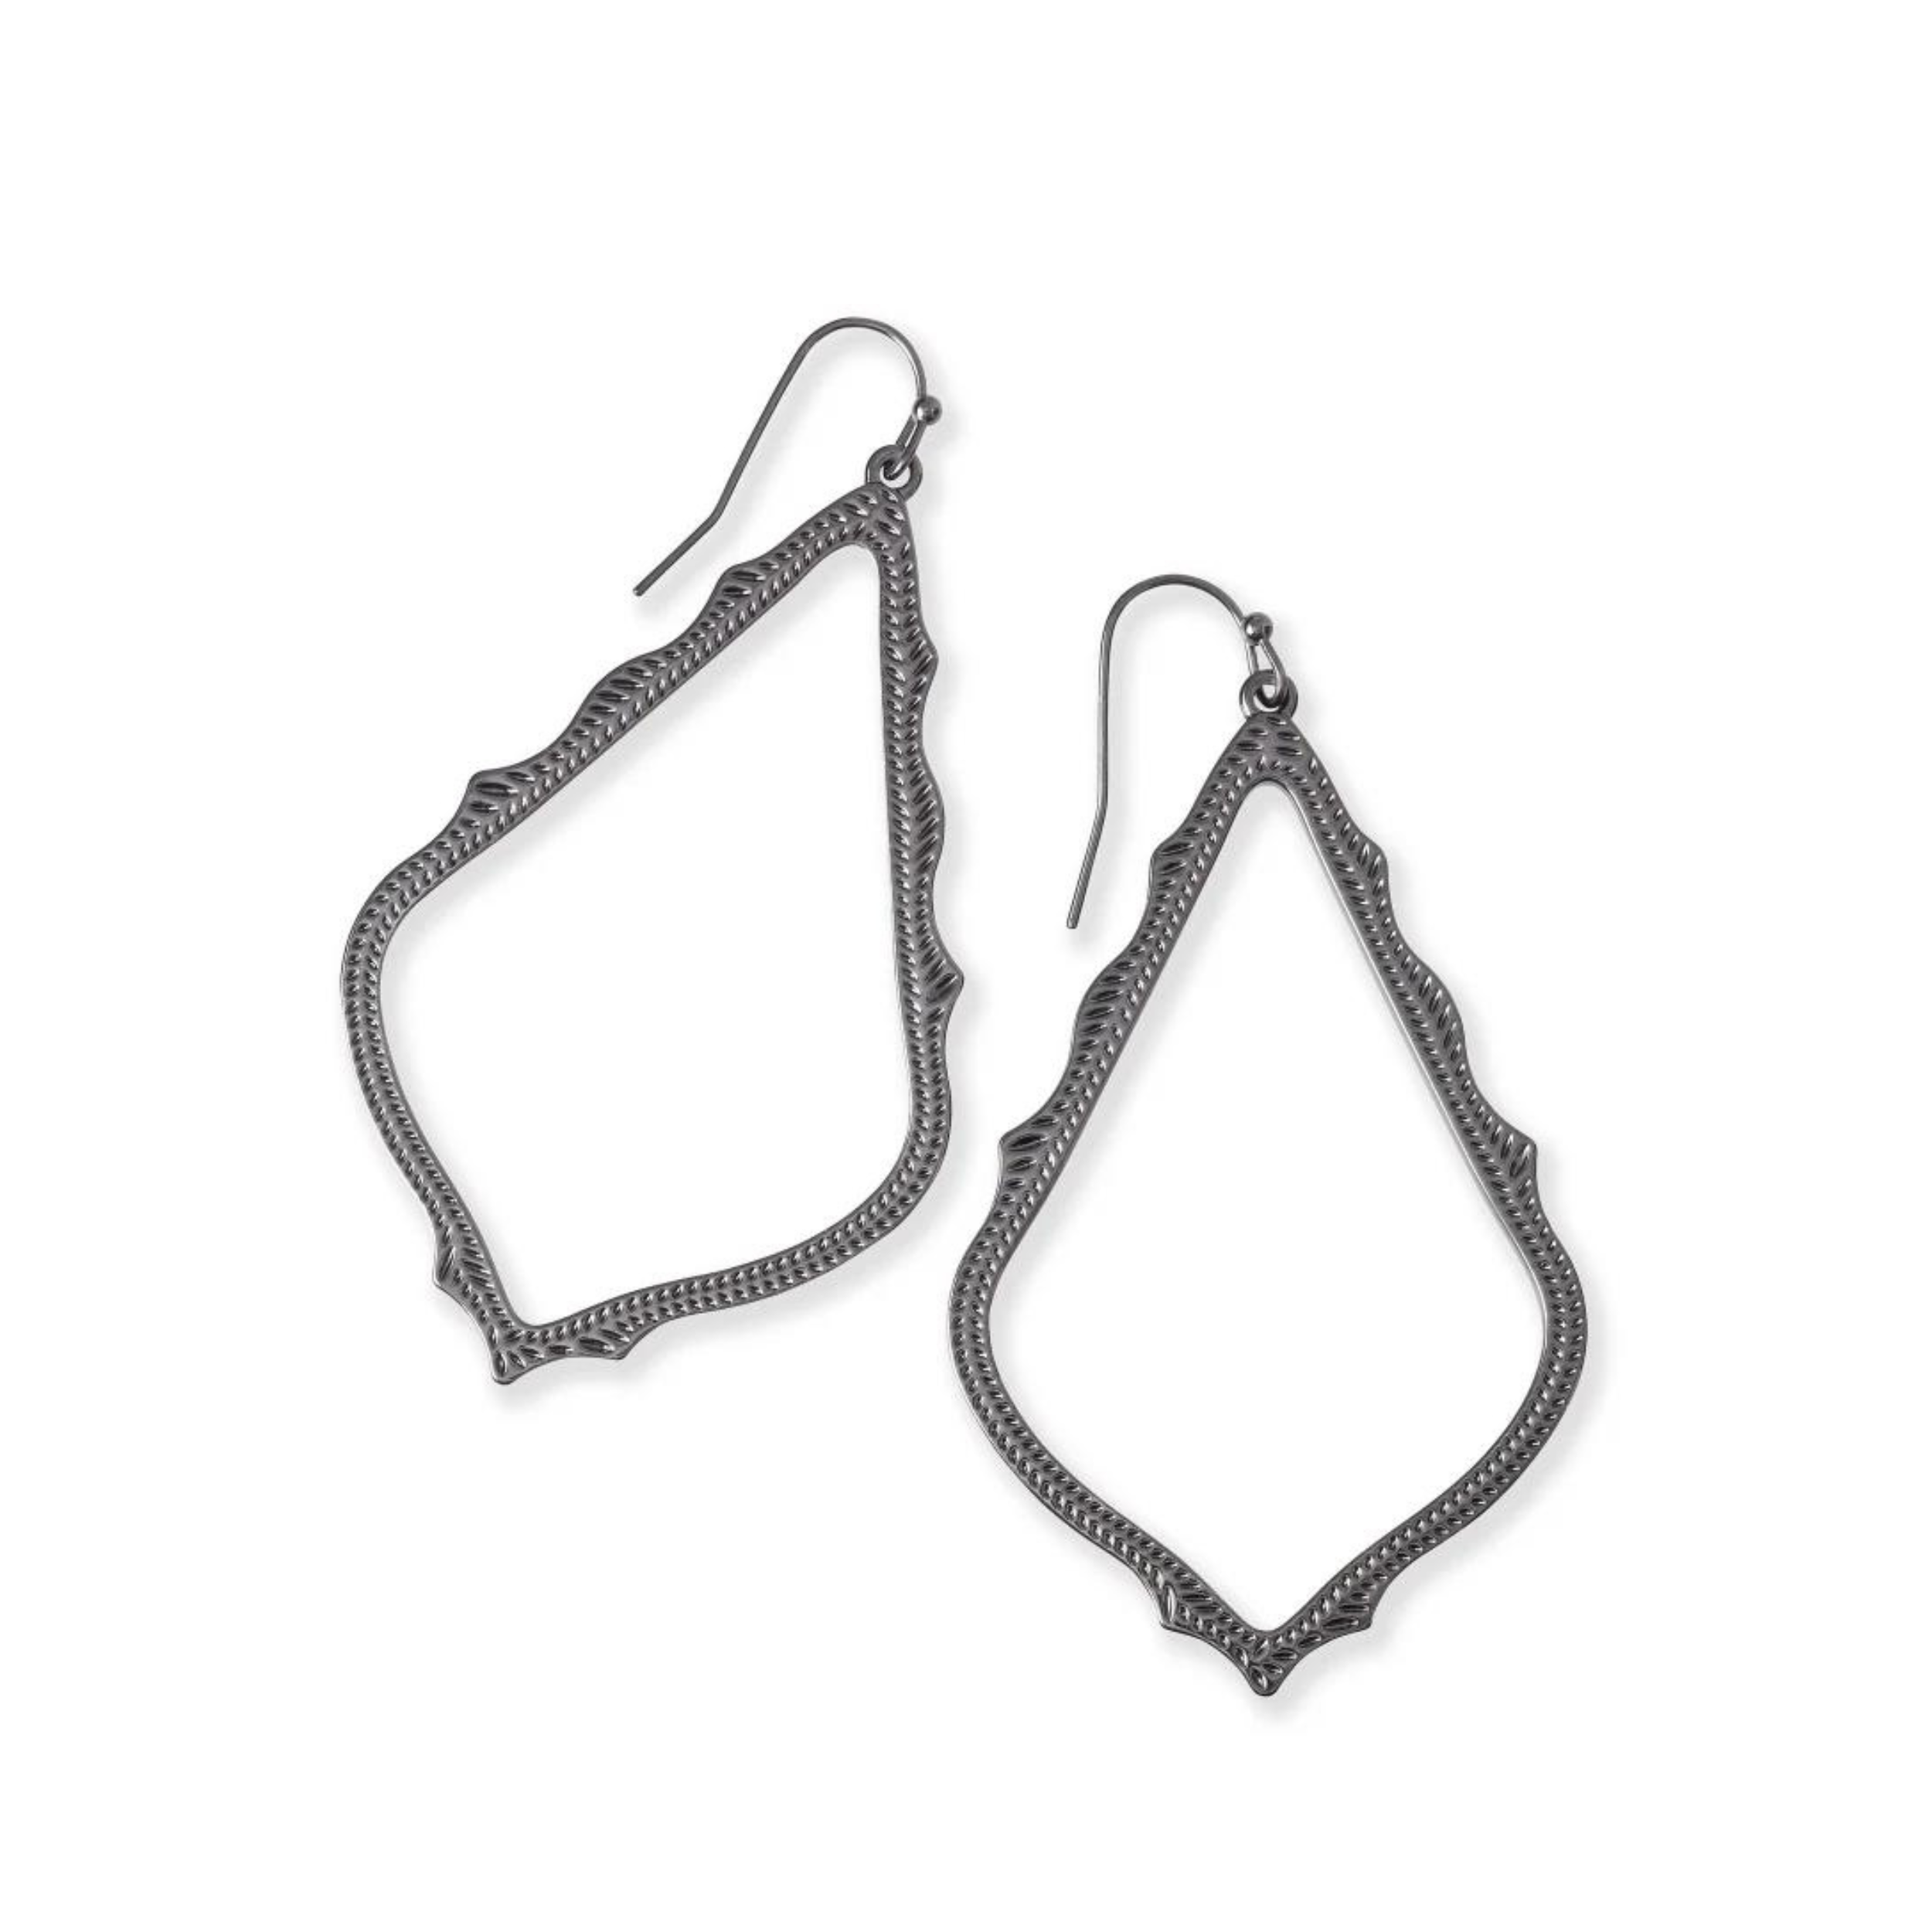 Gunmetal dangle earrings, pictured on a white background.